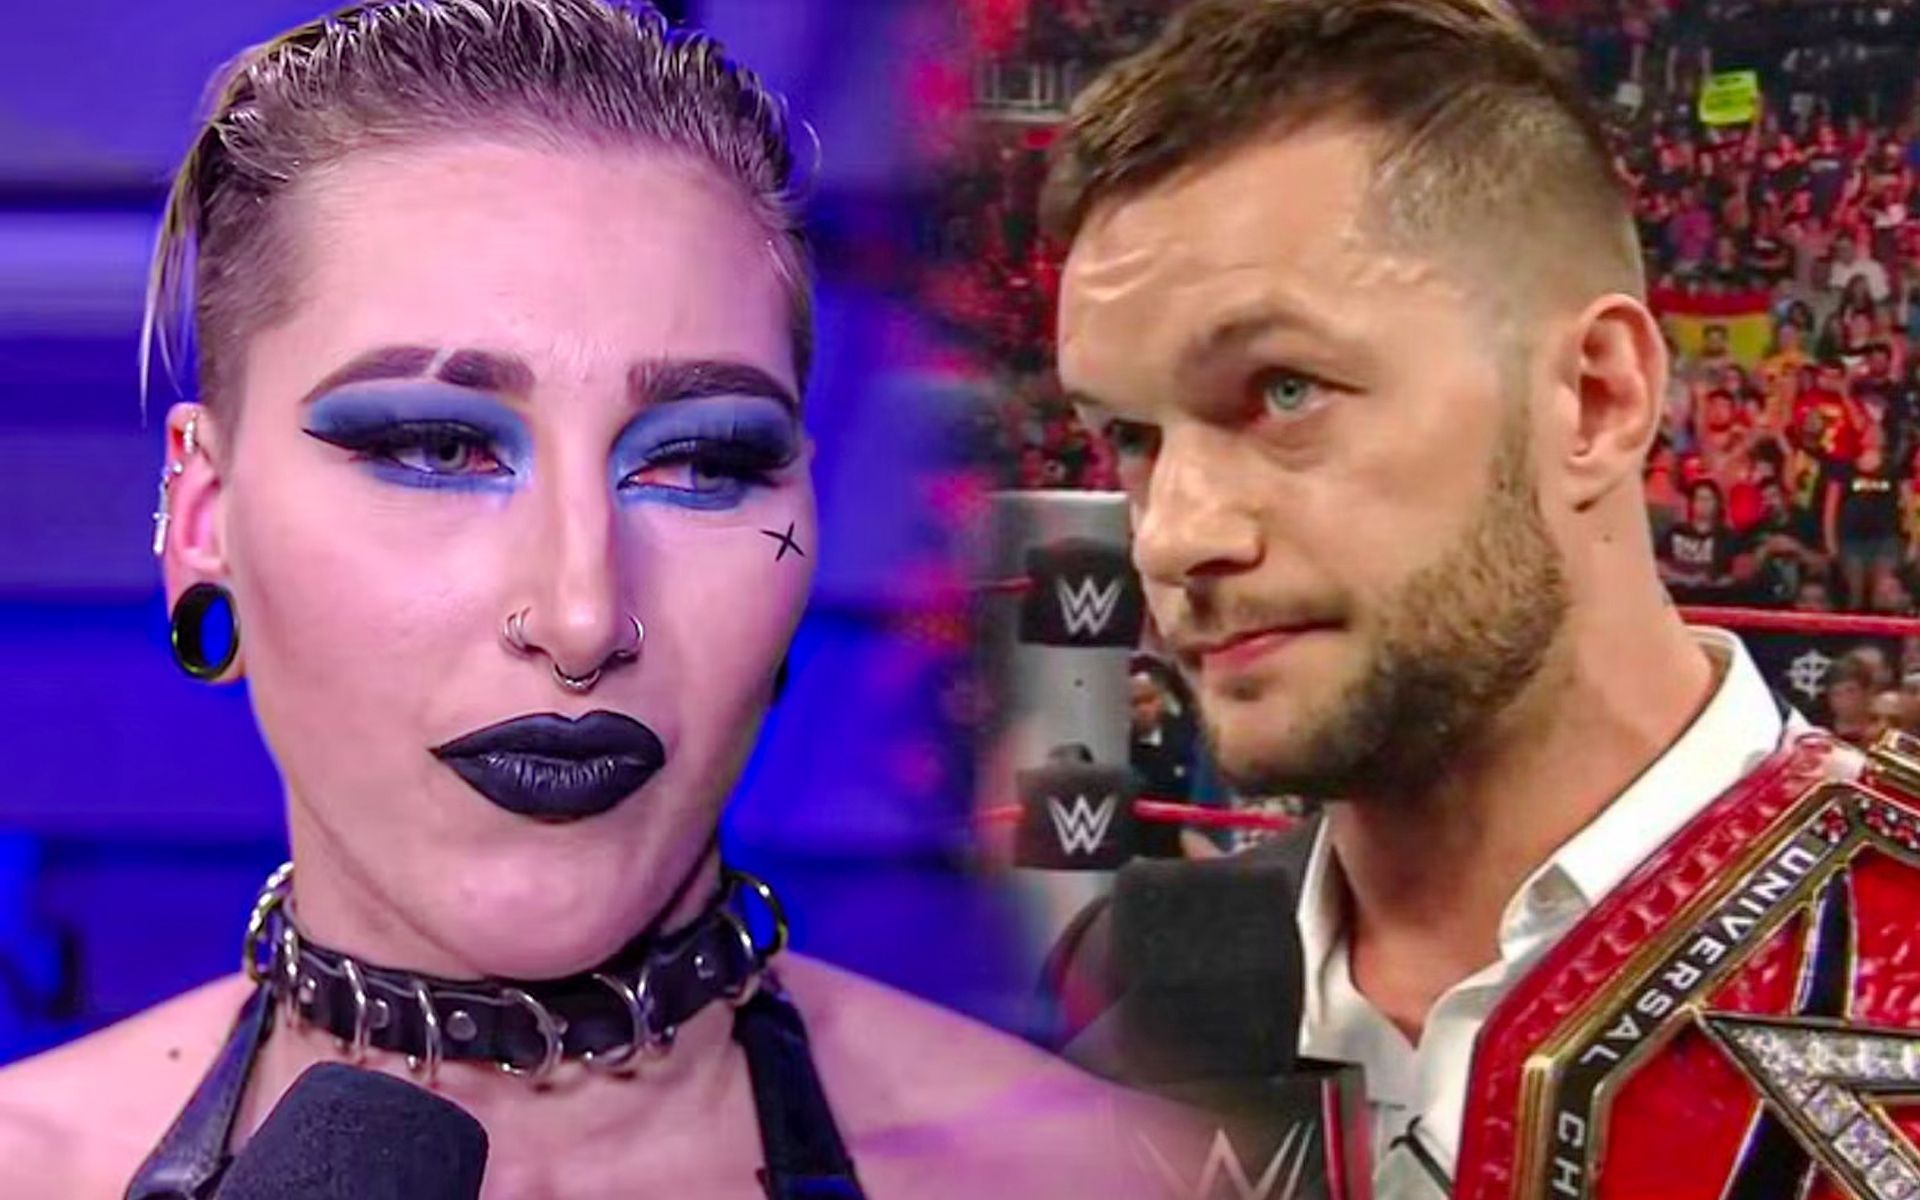 The Judgment Day currently includes Finn Balor, Rhea Ripley, Damian Priest and Dominik Mysterio